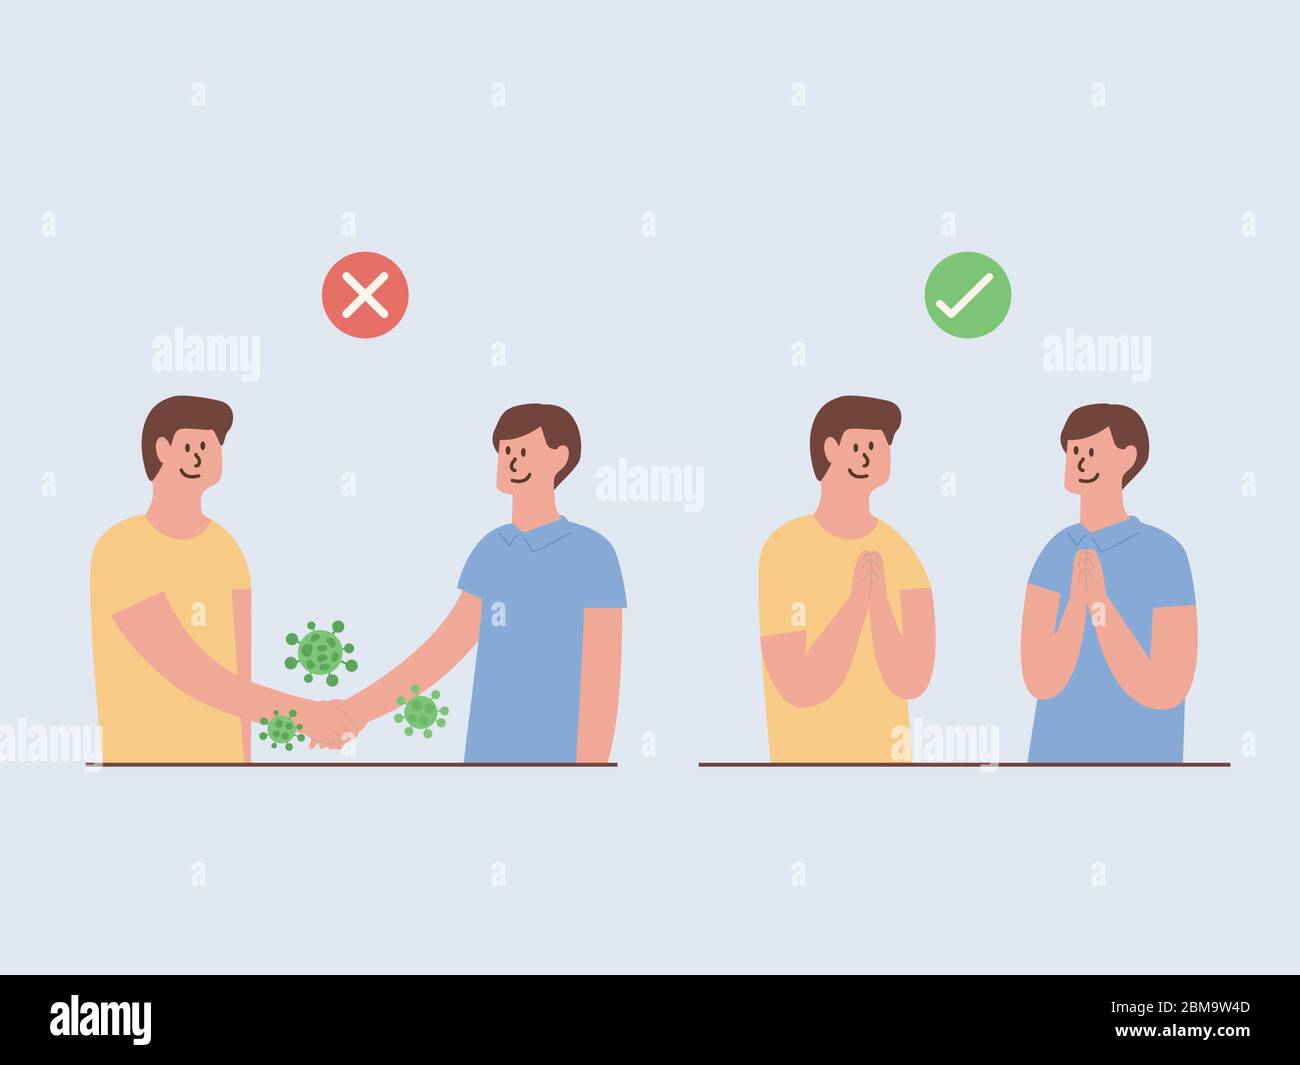 Safe greet is no handshake and no hands contact. Use greet in Asian style for prevent the spread of COVID-19 and inflection. Illustration about Right Stock Vector